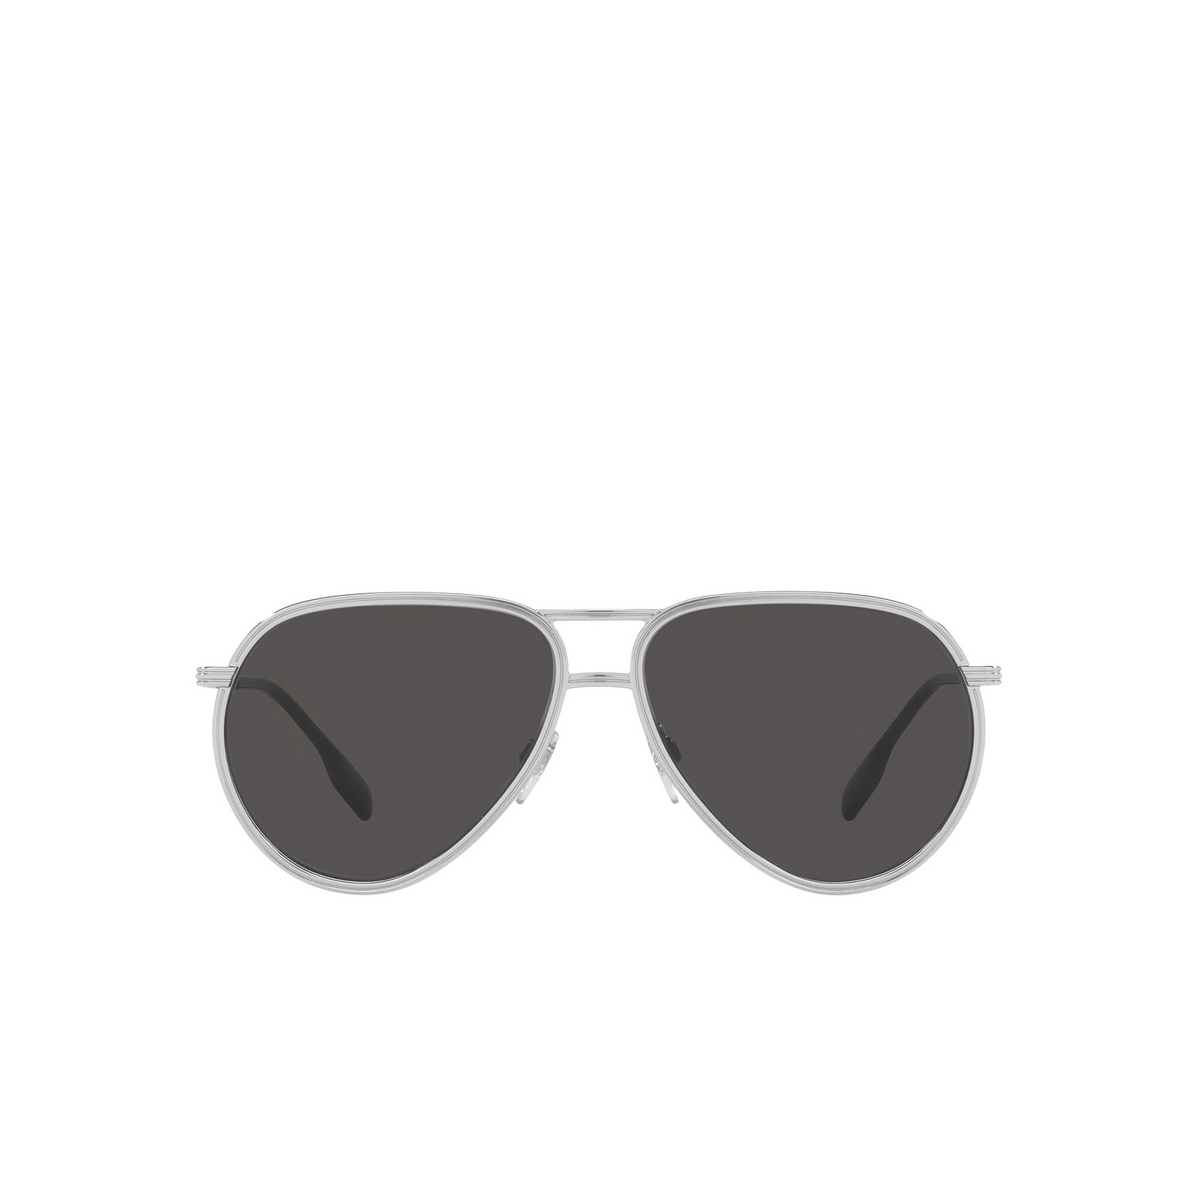 Burberry® Aviator Sunglasses: BE3135 Scott color 100587 Silver - front view